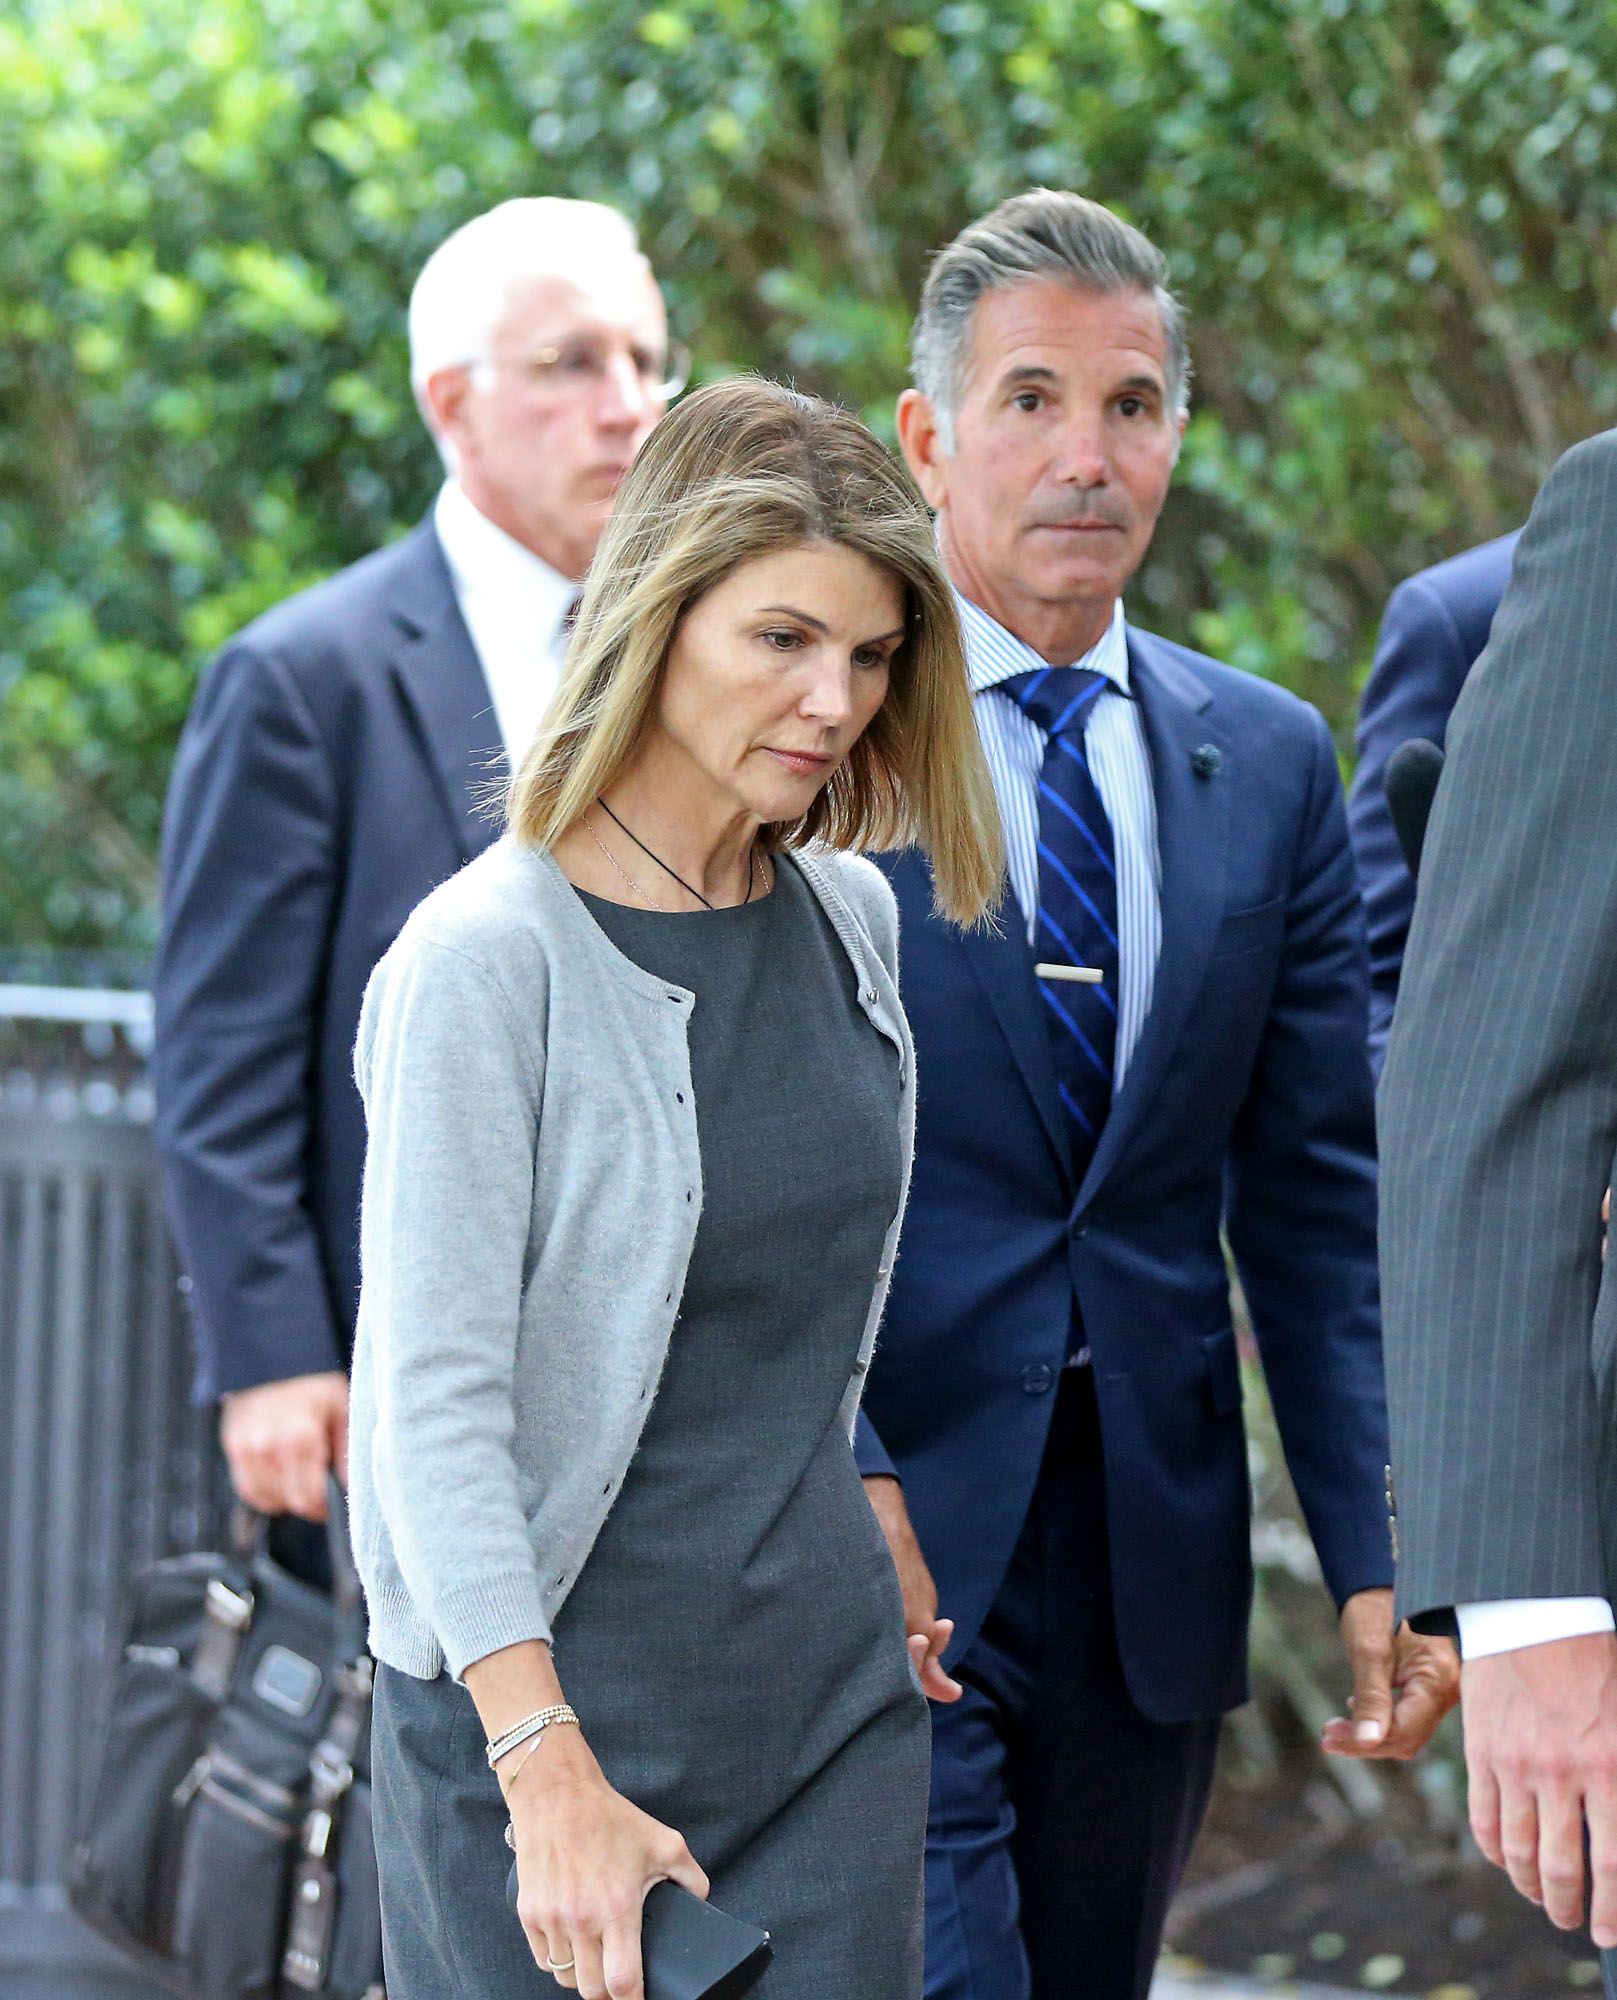  Lori Loughlin and husband Mossimo Giannulli outside Moakley Federal Courthouse after a hearing in August 2019 in Boston, MA. | Source: Getty Images